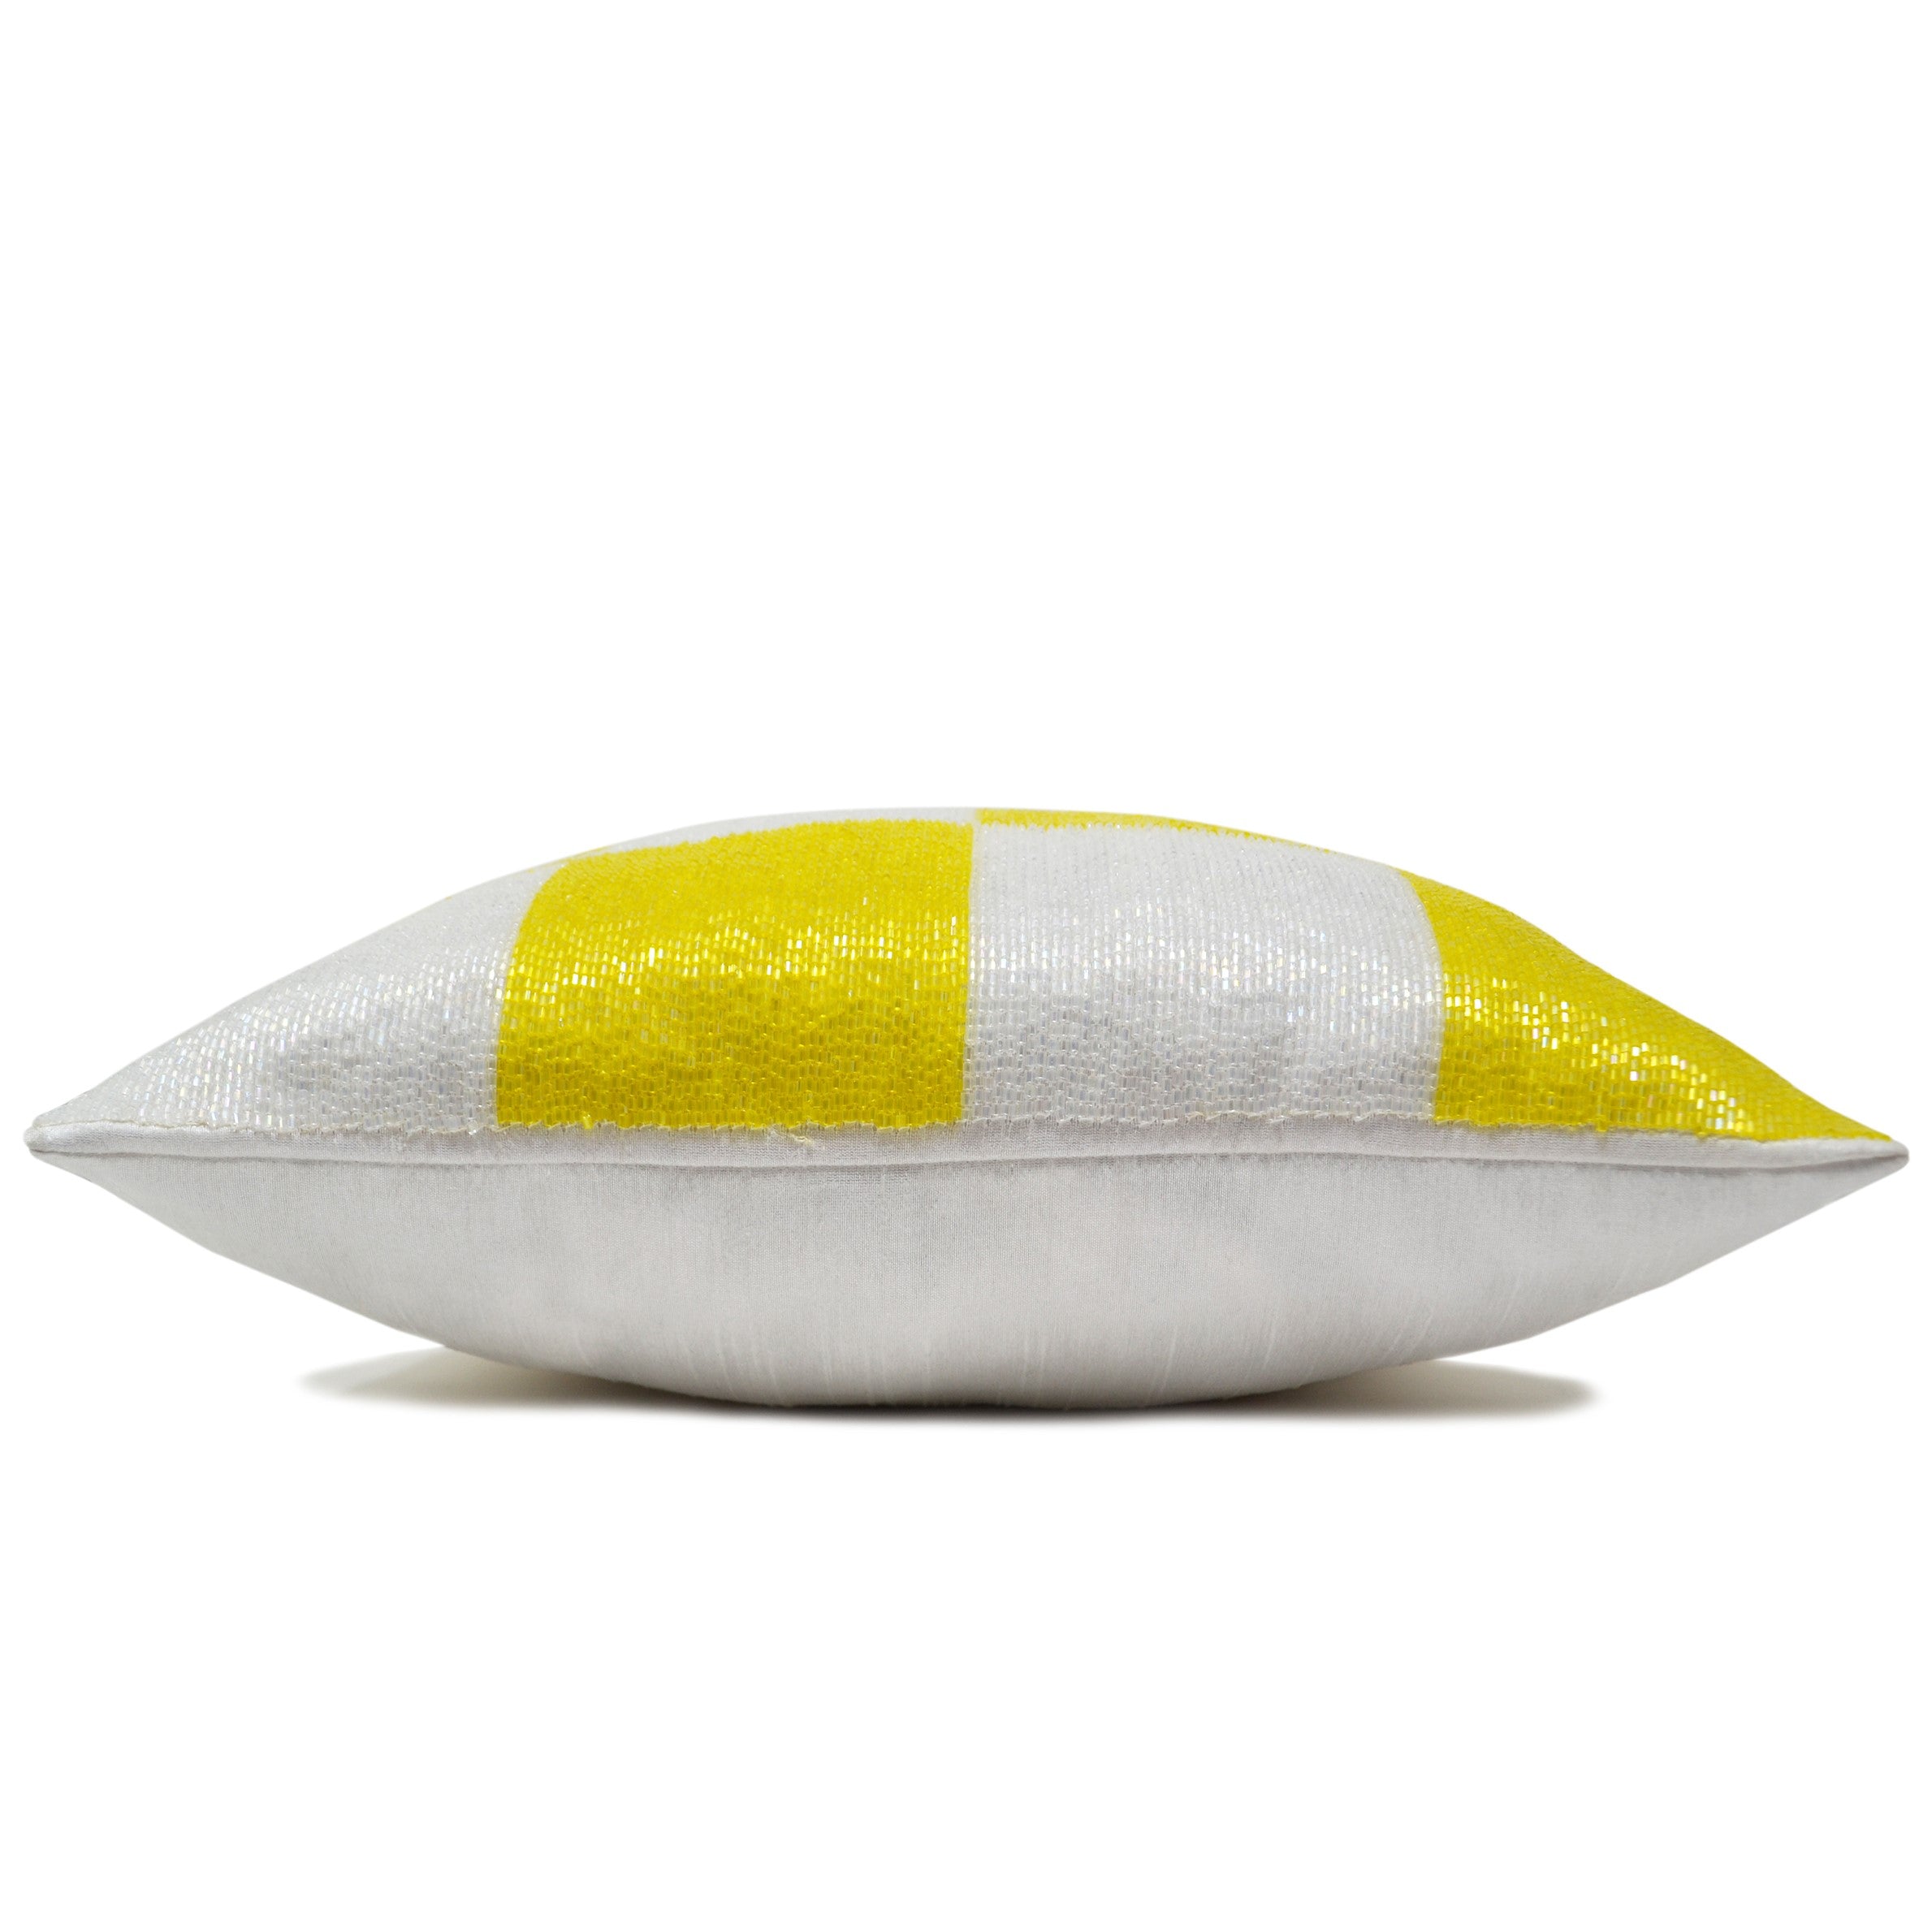 White and yellow dorm pillow cover, back to school